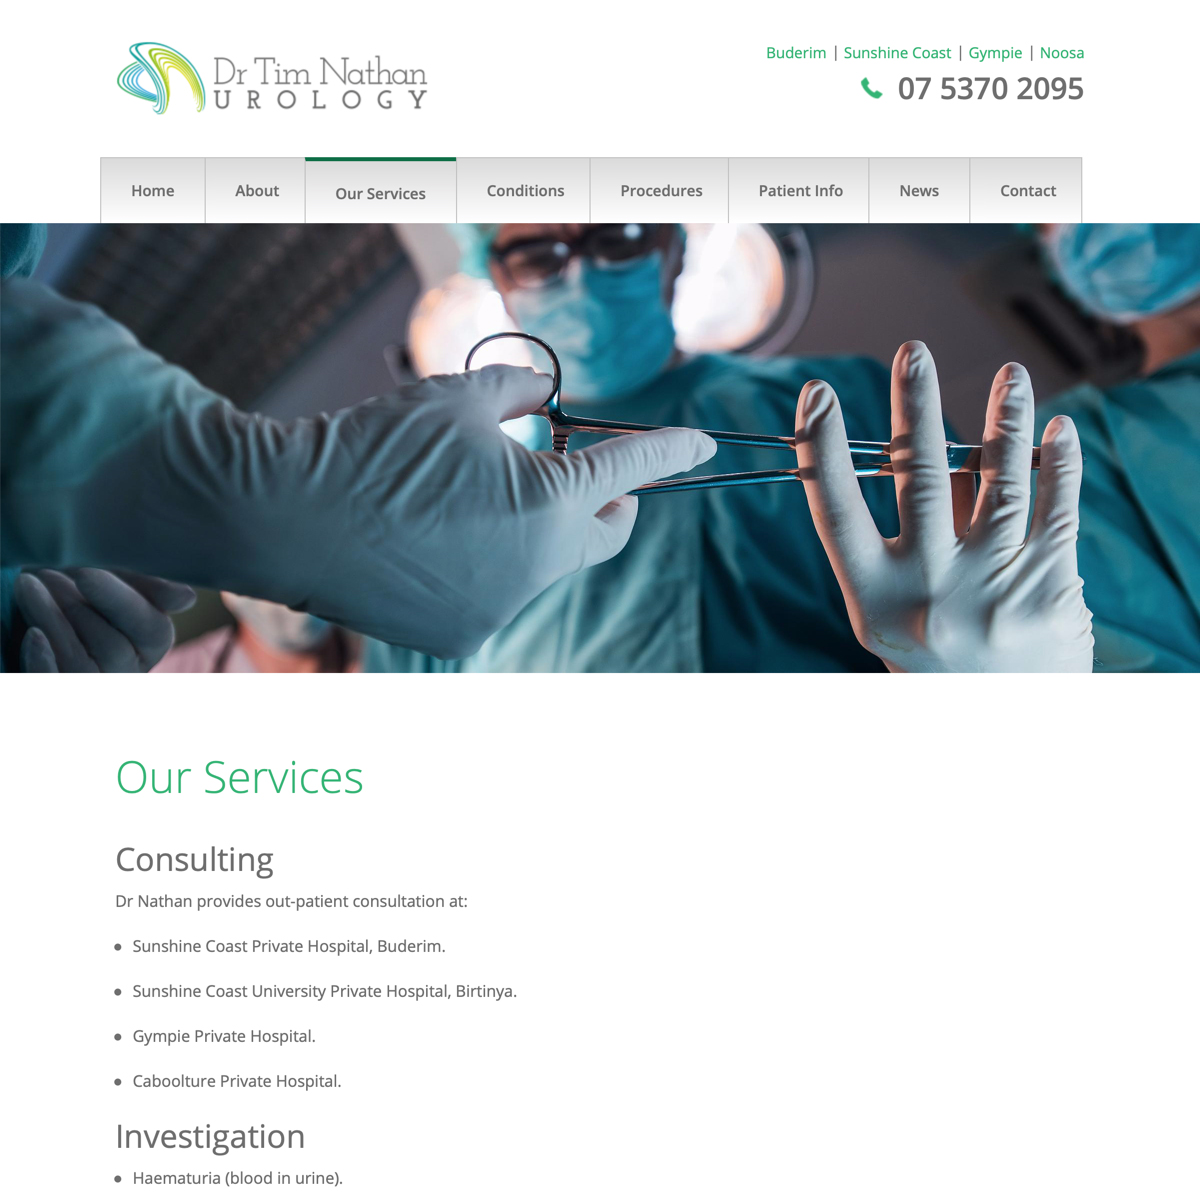 Dr Tim Nathan Urology - Our Services